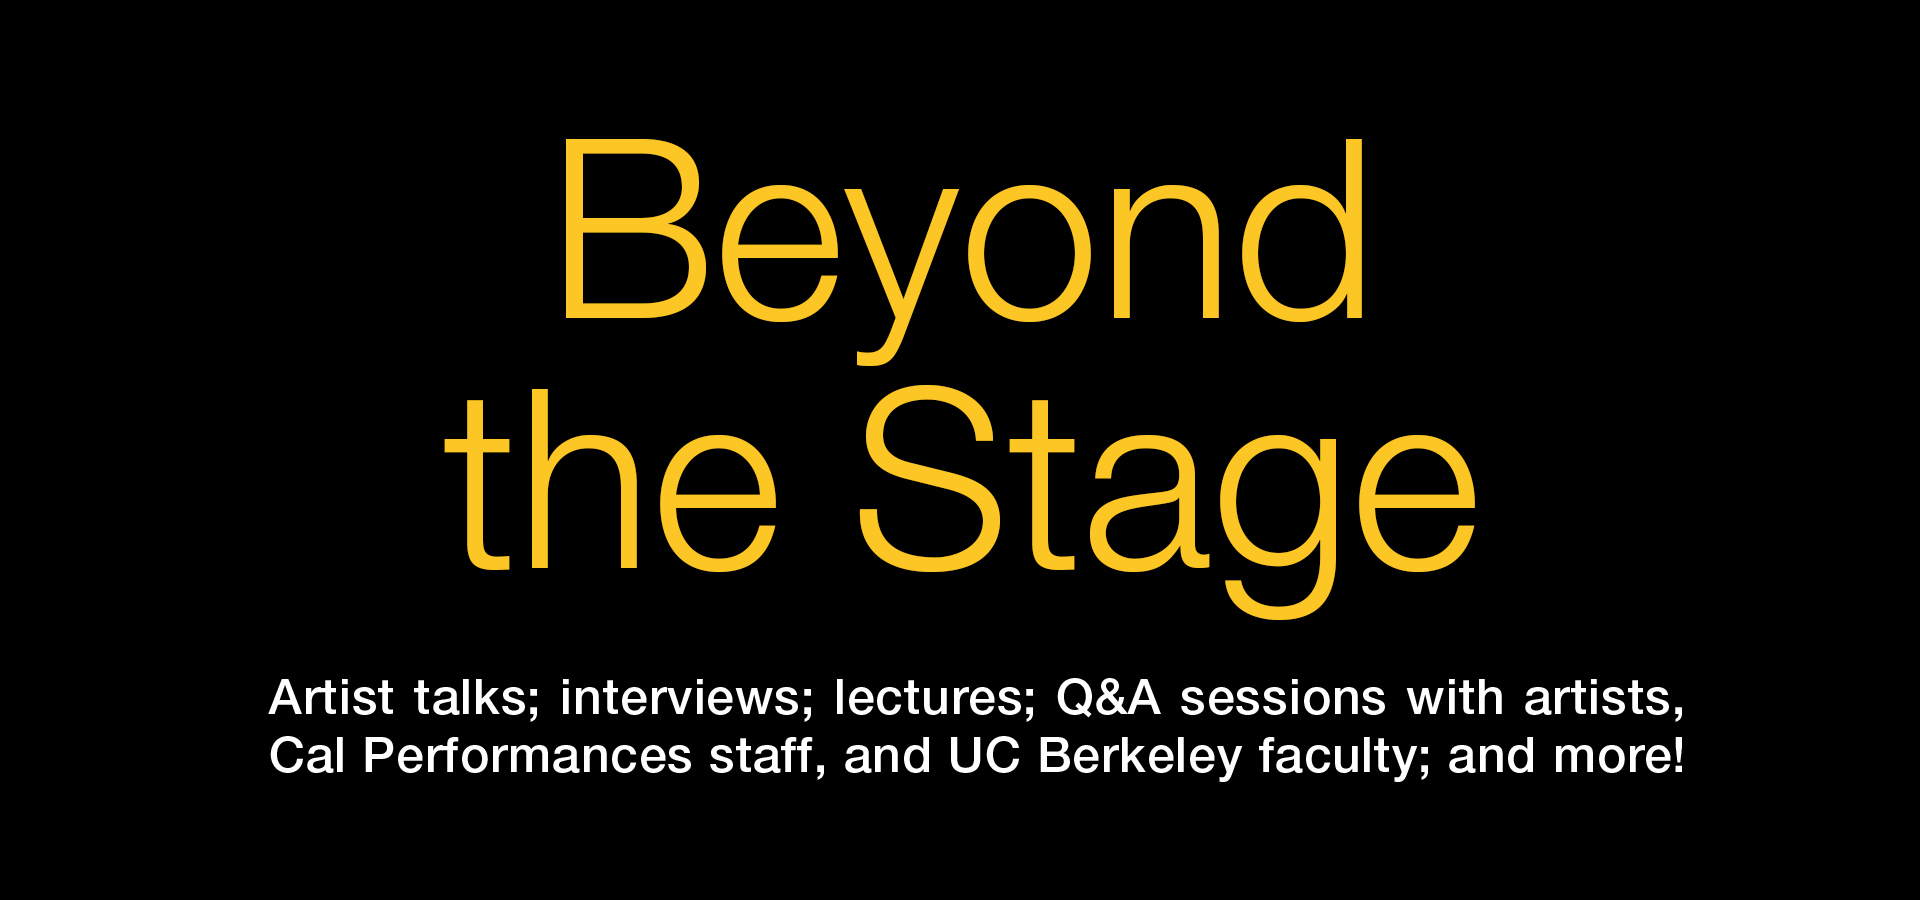 Beyond the Stage. Artist talks; interviews; lectures; Q&A sessions with artists, Cal Performances staff, and UC Berkeley faculty; and more!